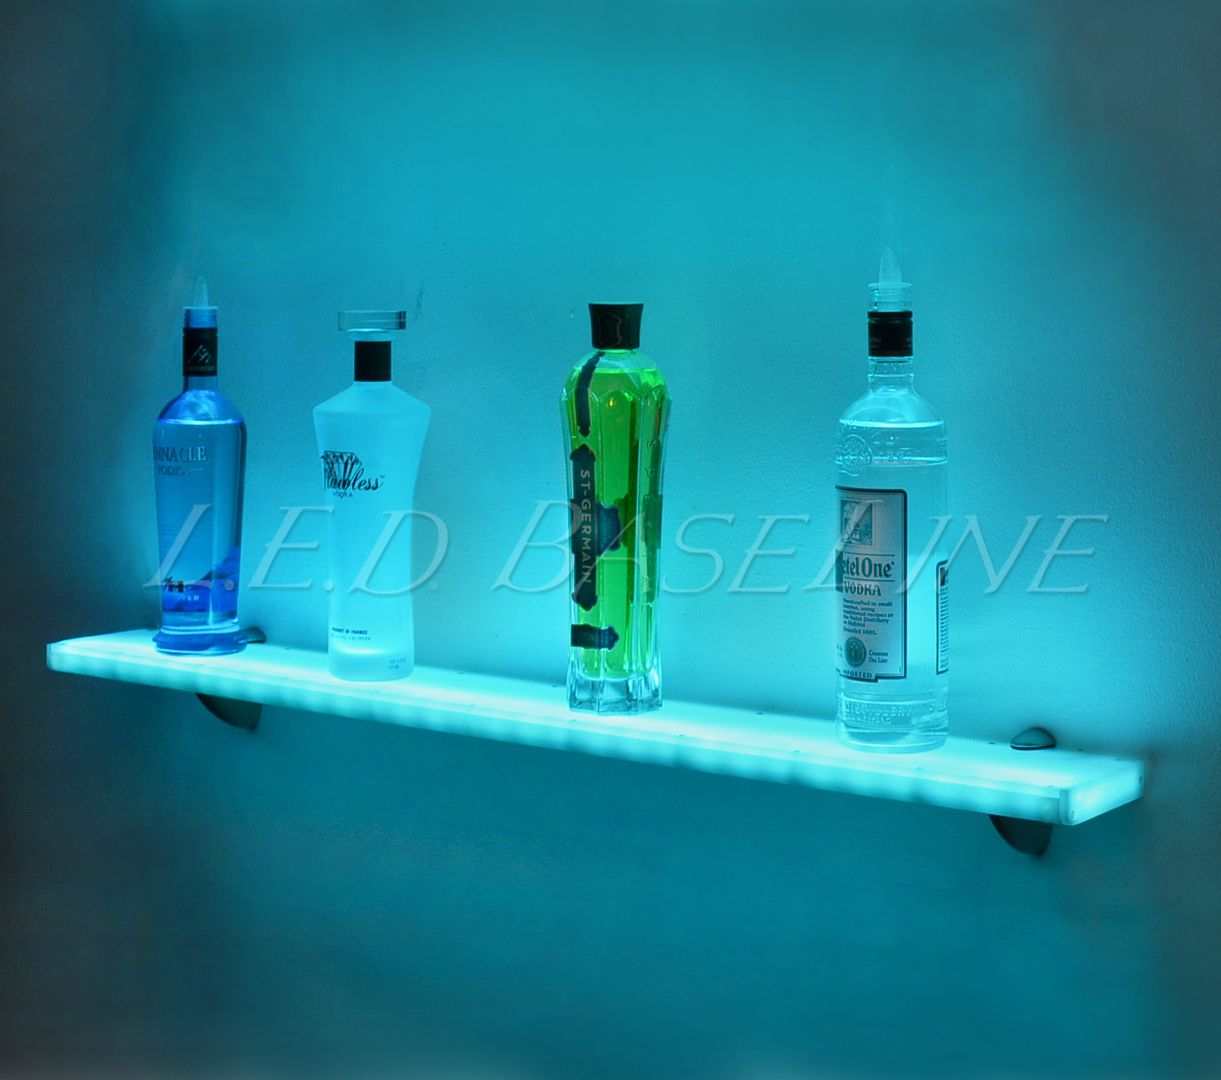 84” LED Lighted Floating Wall Display Shelf Retail Store Home Bar 